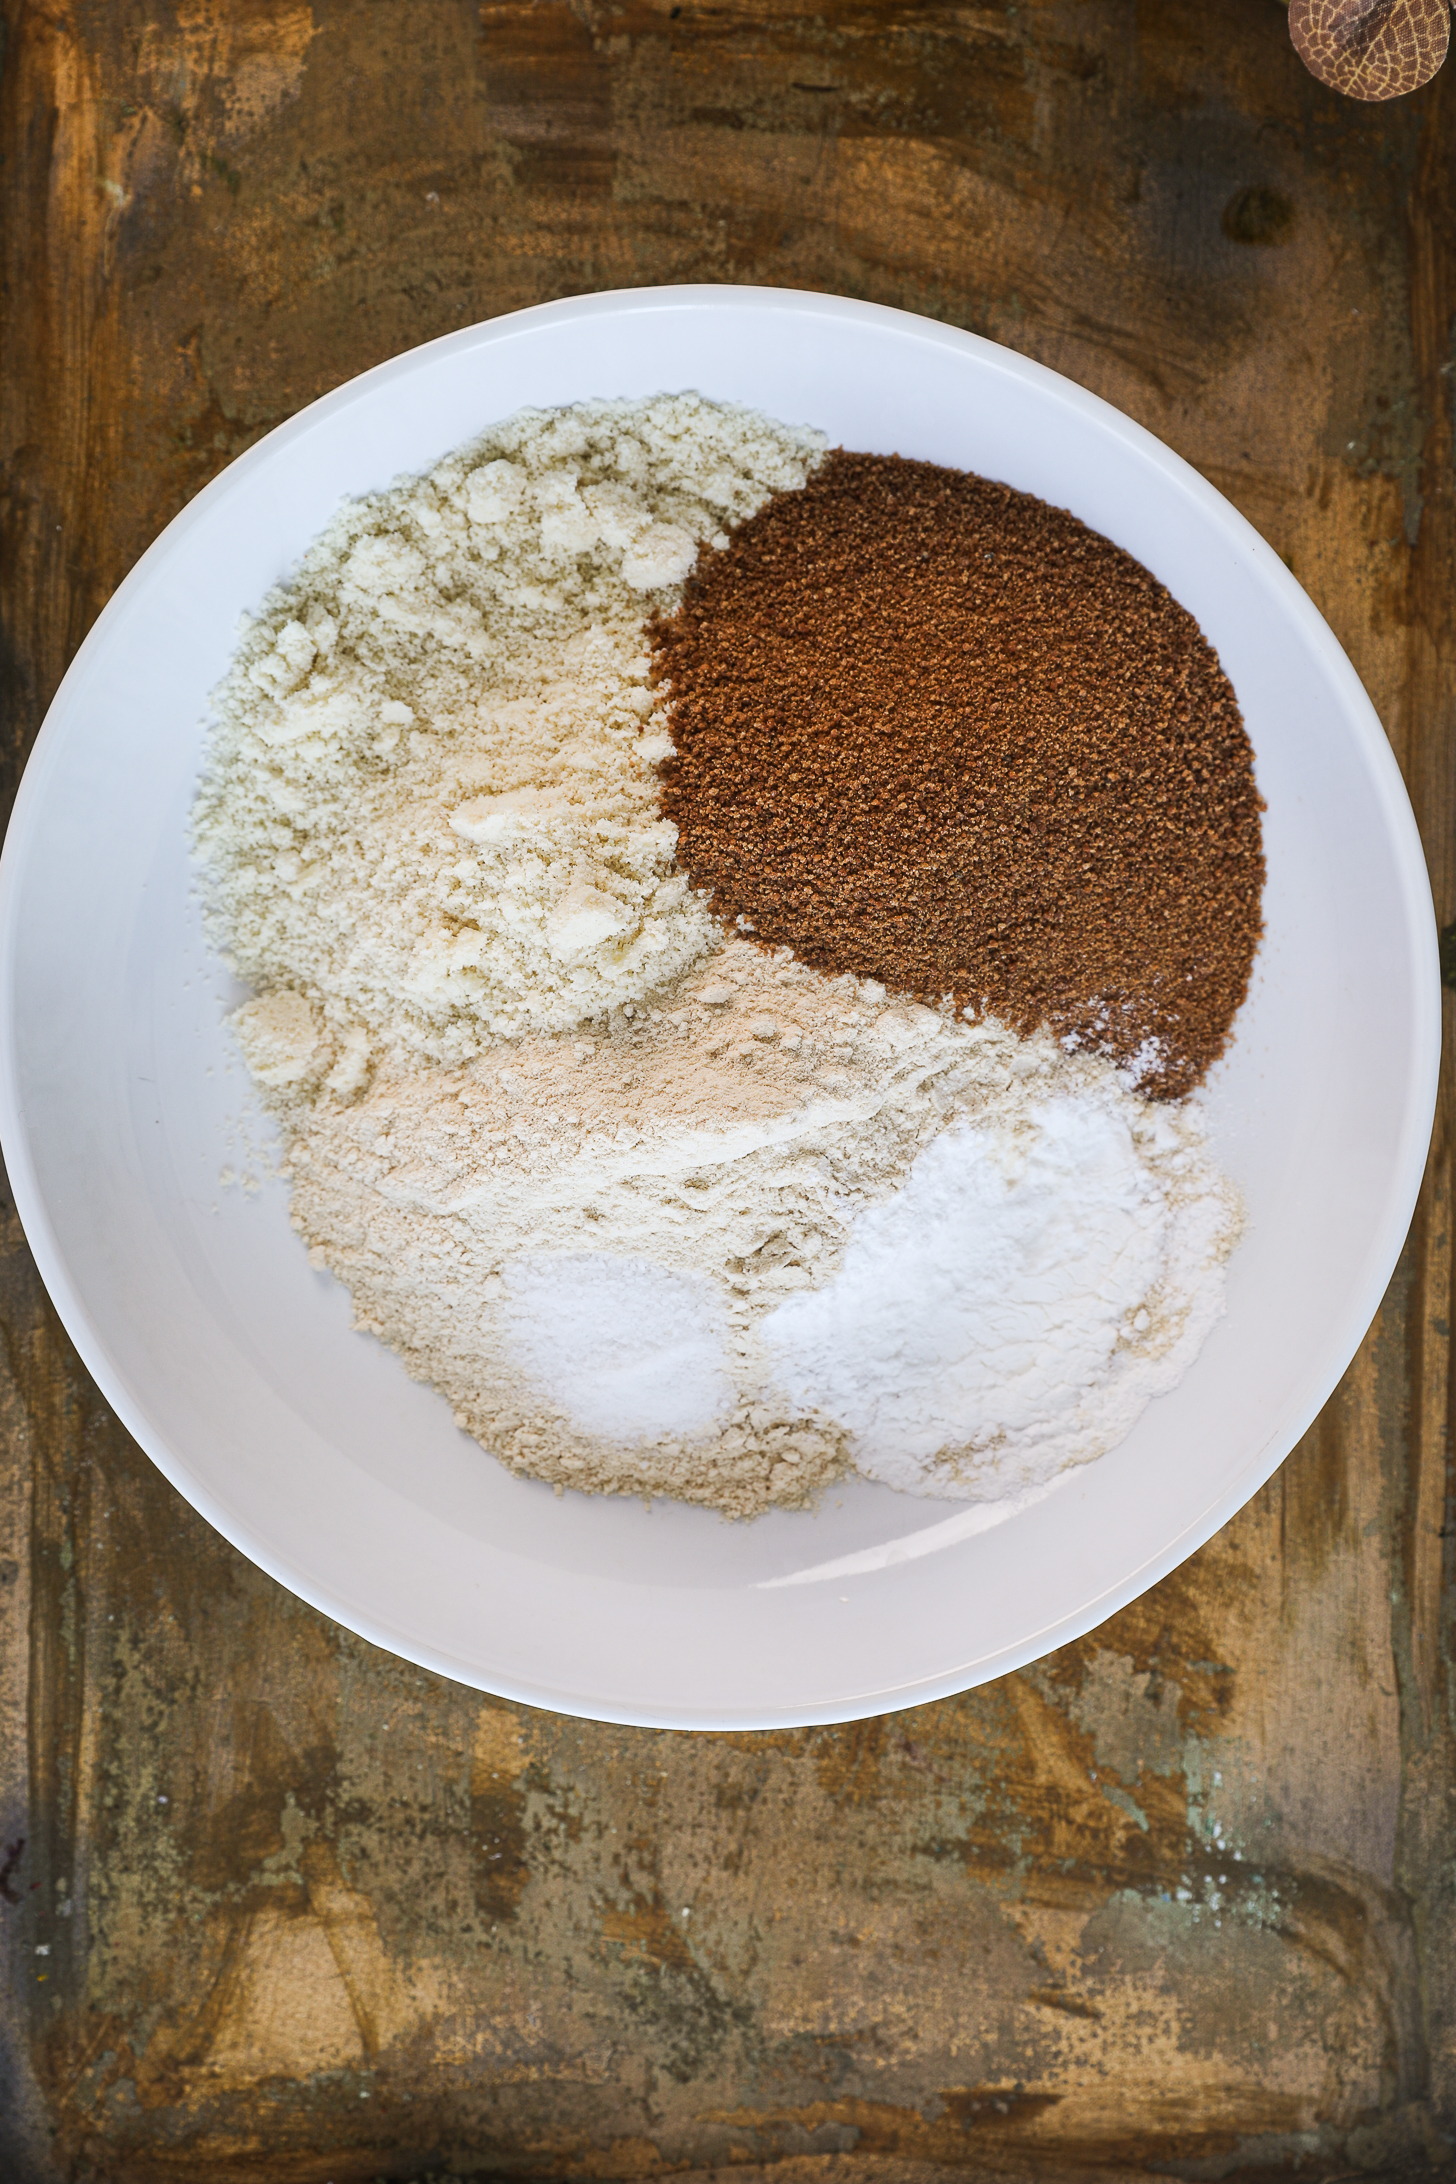 A bowl containing separate sections of various flours, coconut sugar, and baking powder.